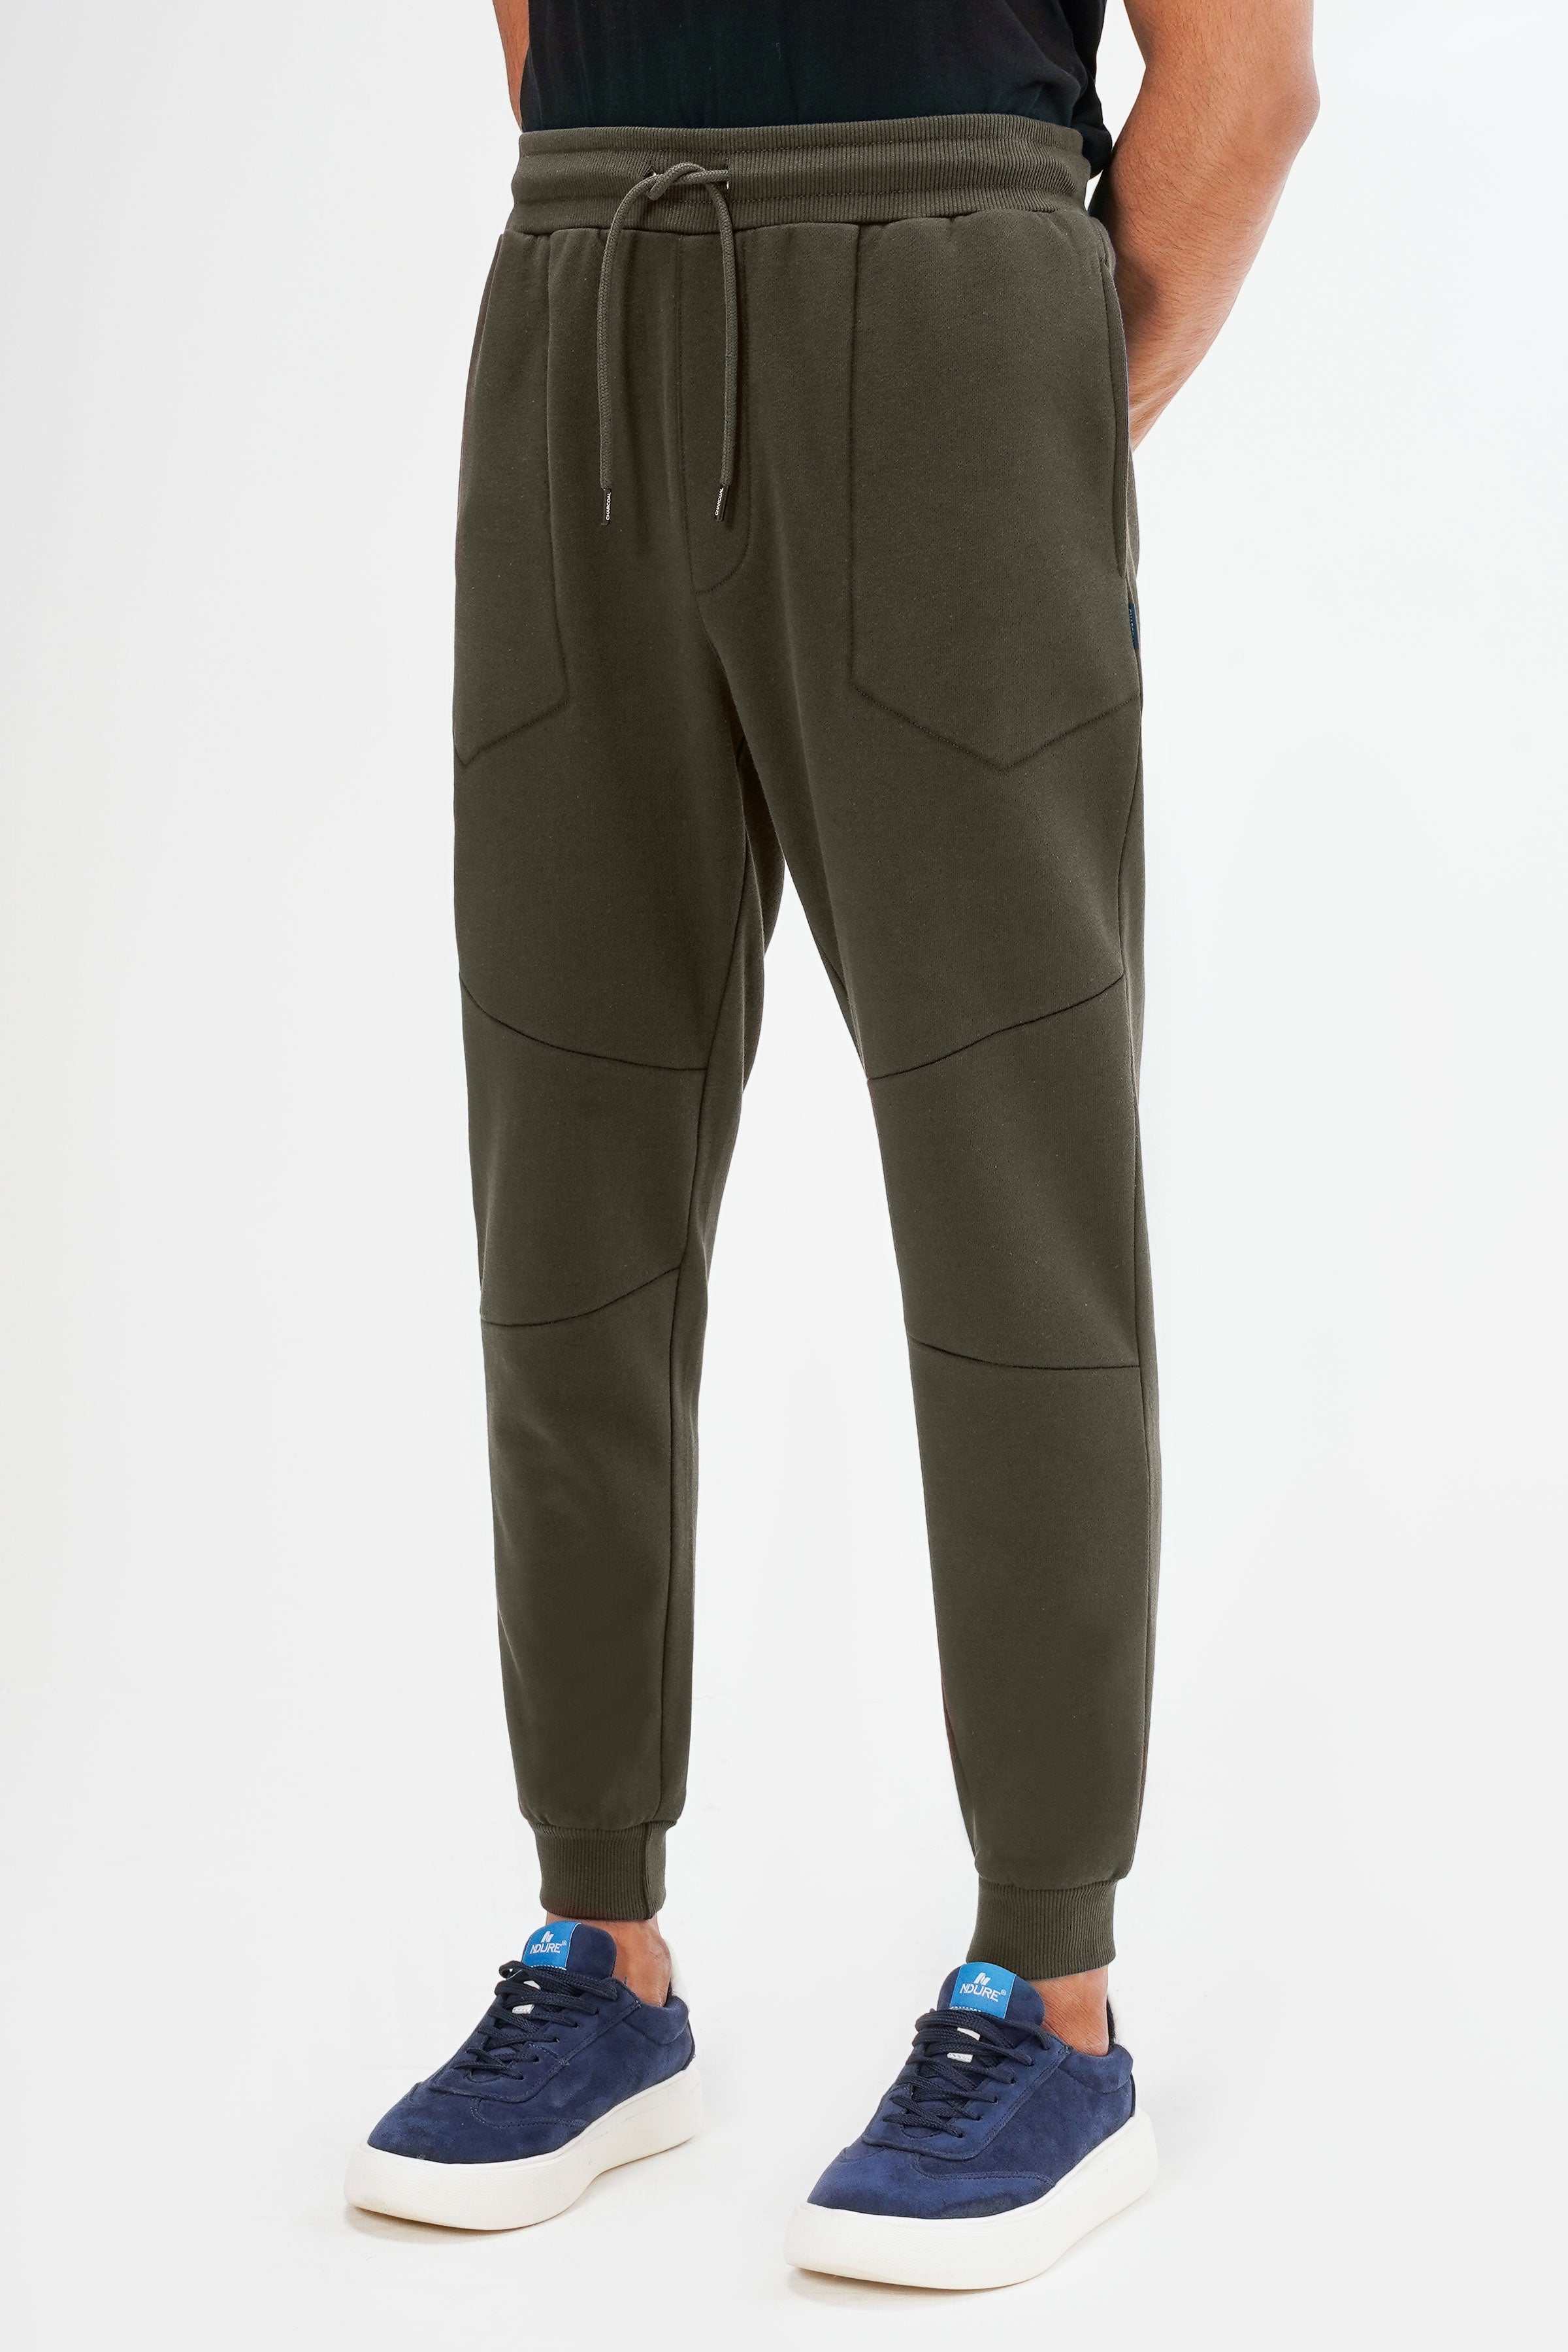 TERRY FLEECE JOGGER TROUSER DARK OLIVE at Charcoal Clothing